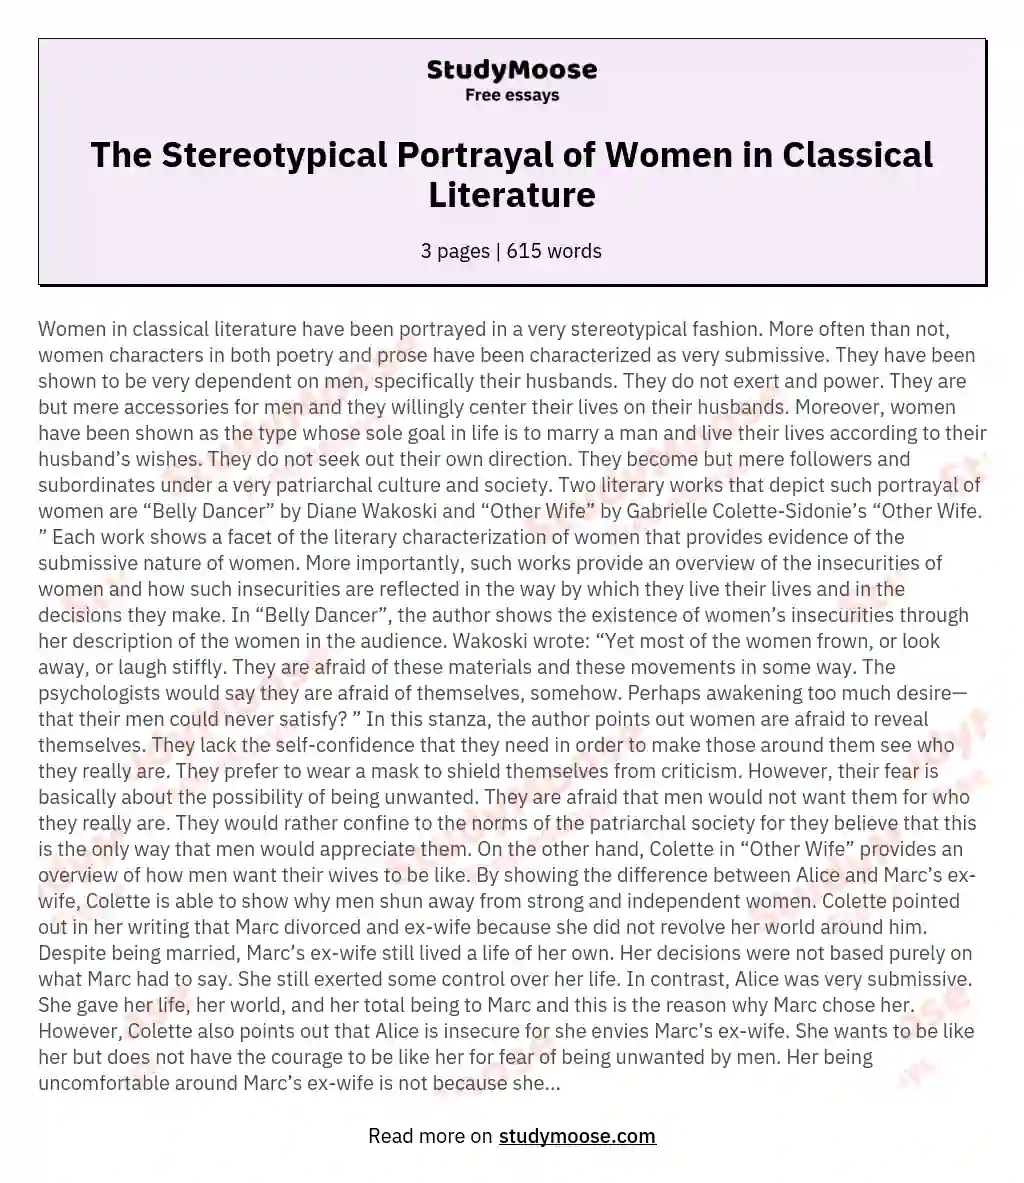 The Stereotypical Portrayal of Women in Classical Literature essay